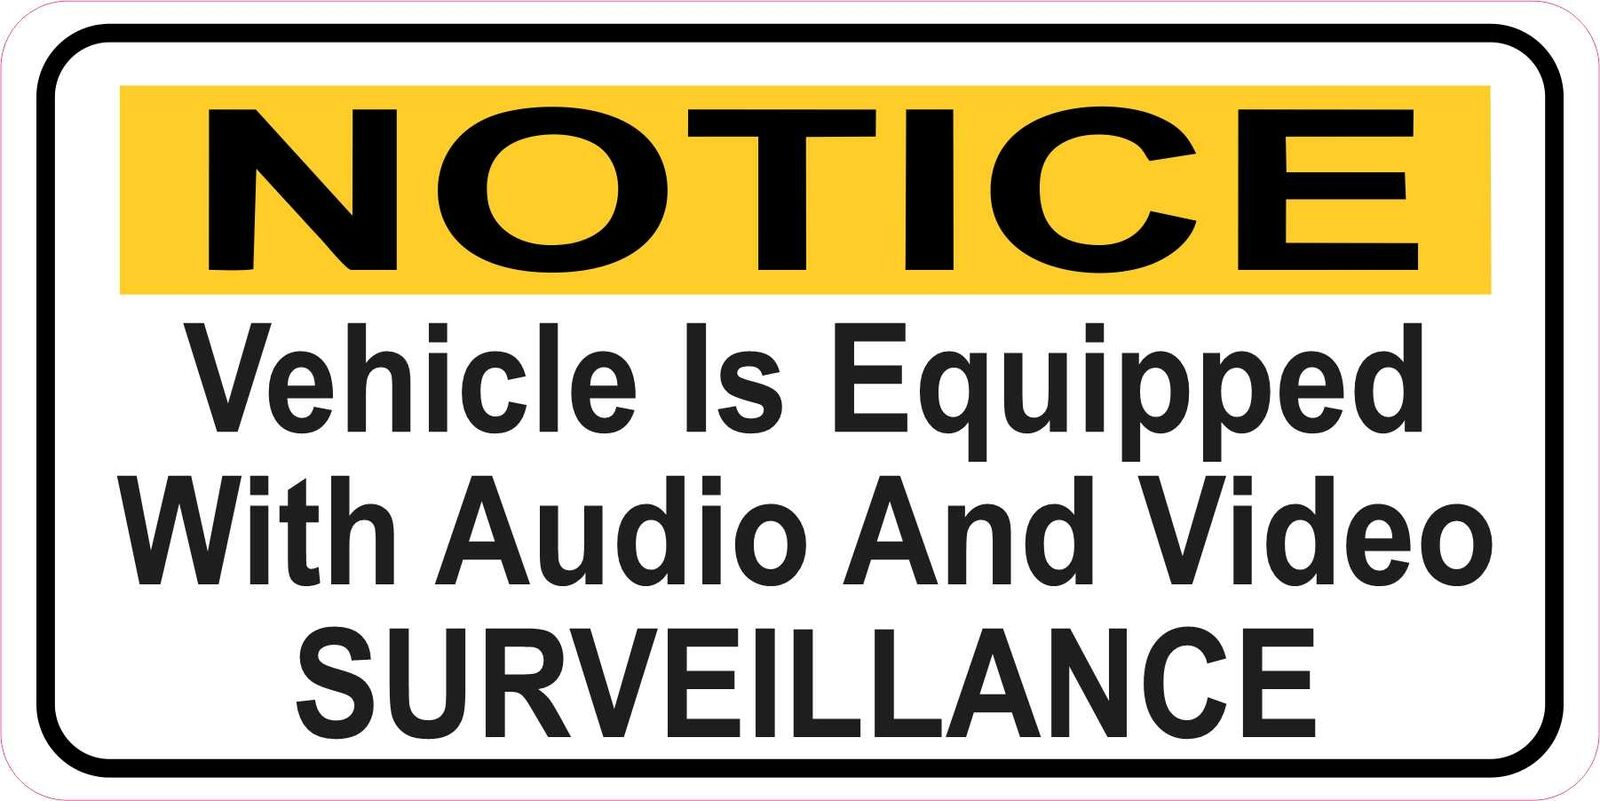 6in x 3in Vehicle Audio and Video Surveillance Magnet Car Truck Magnetic Sign